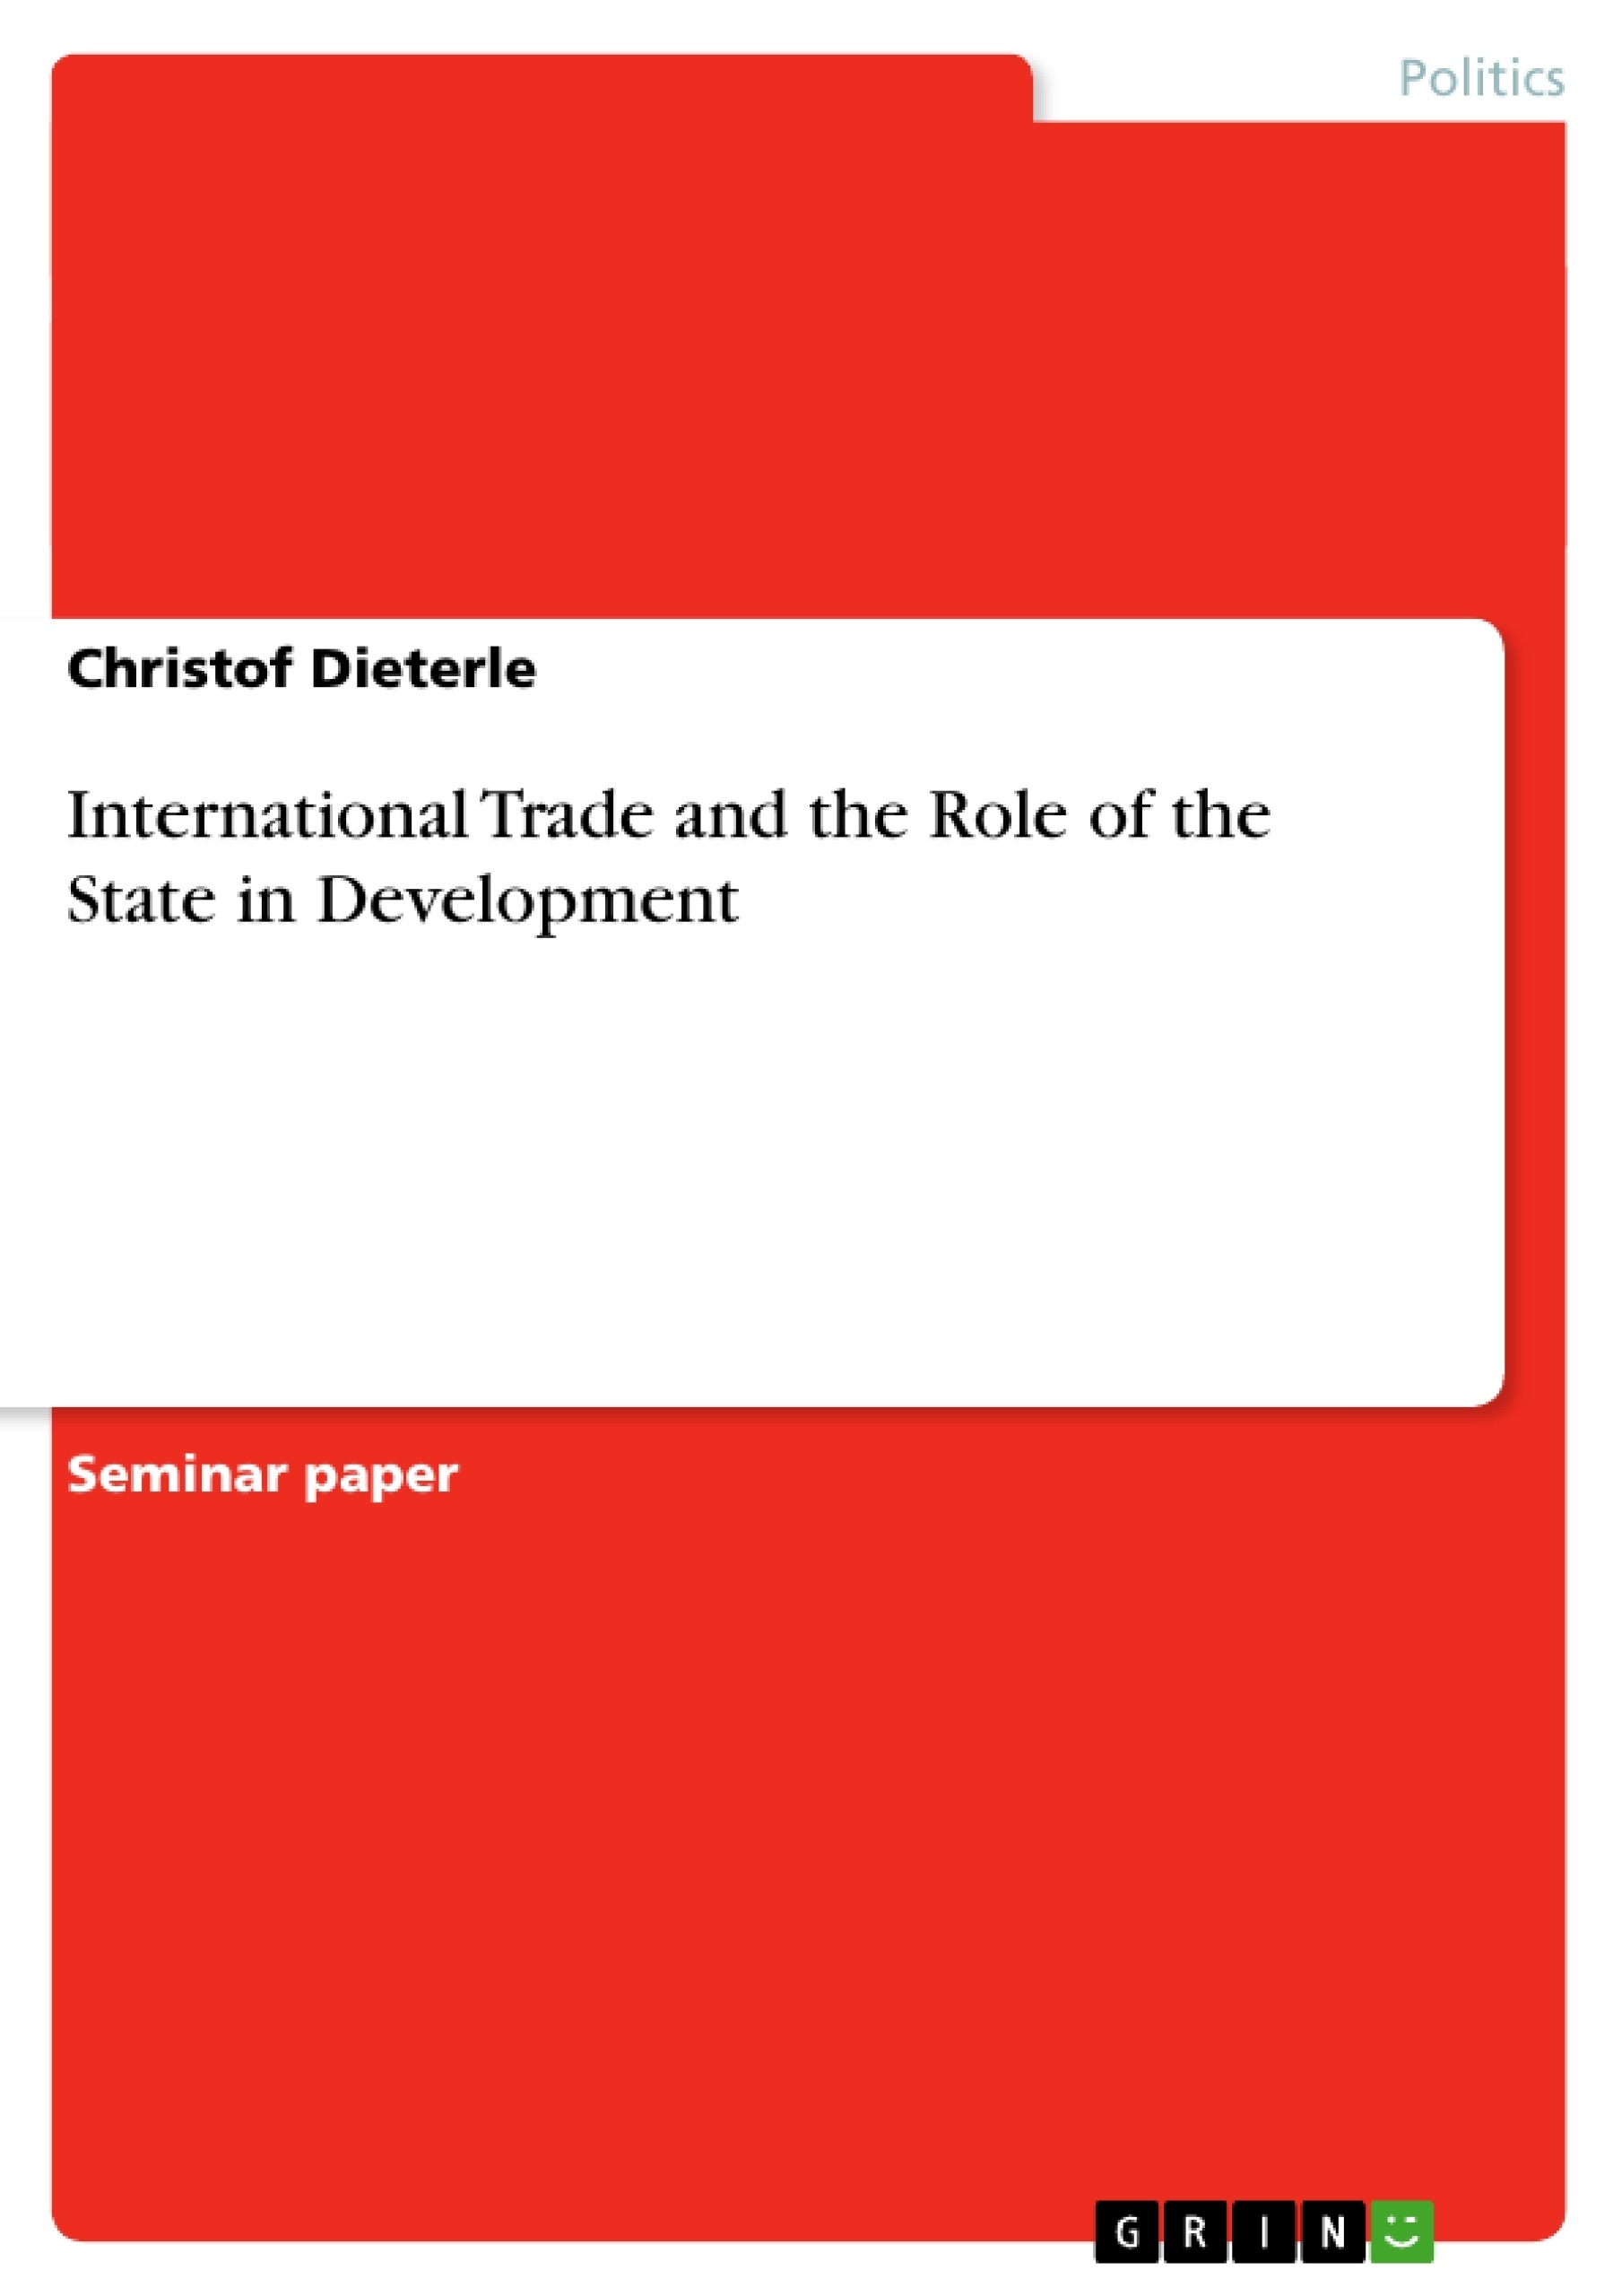 Title: International Trade and the Role of the State in Development